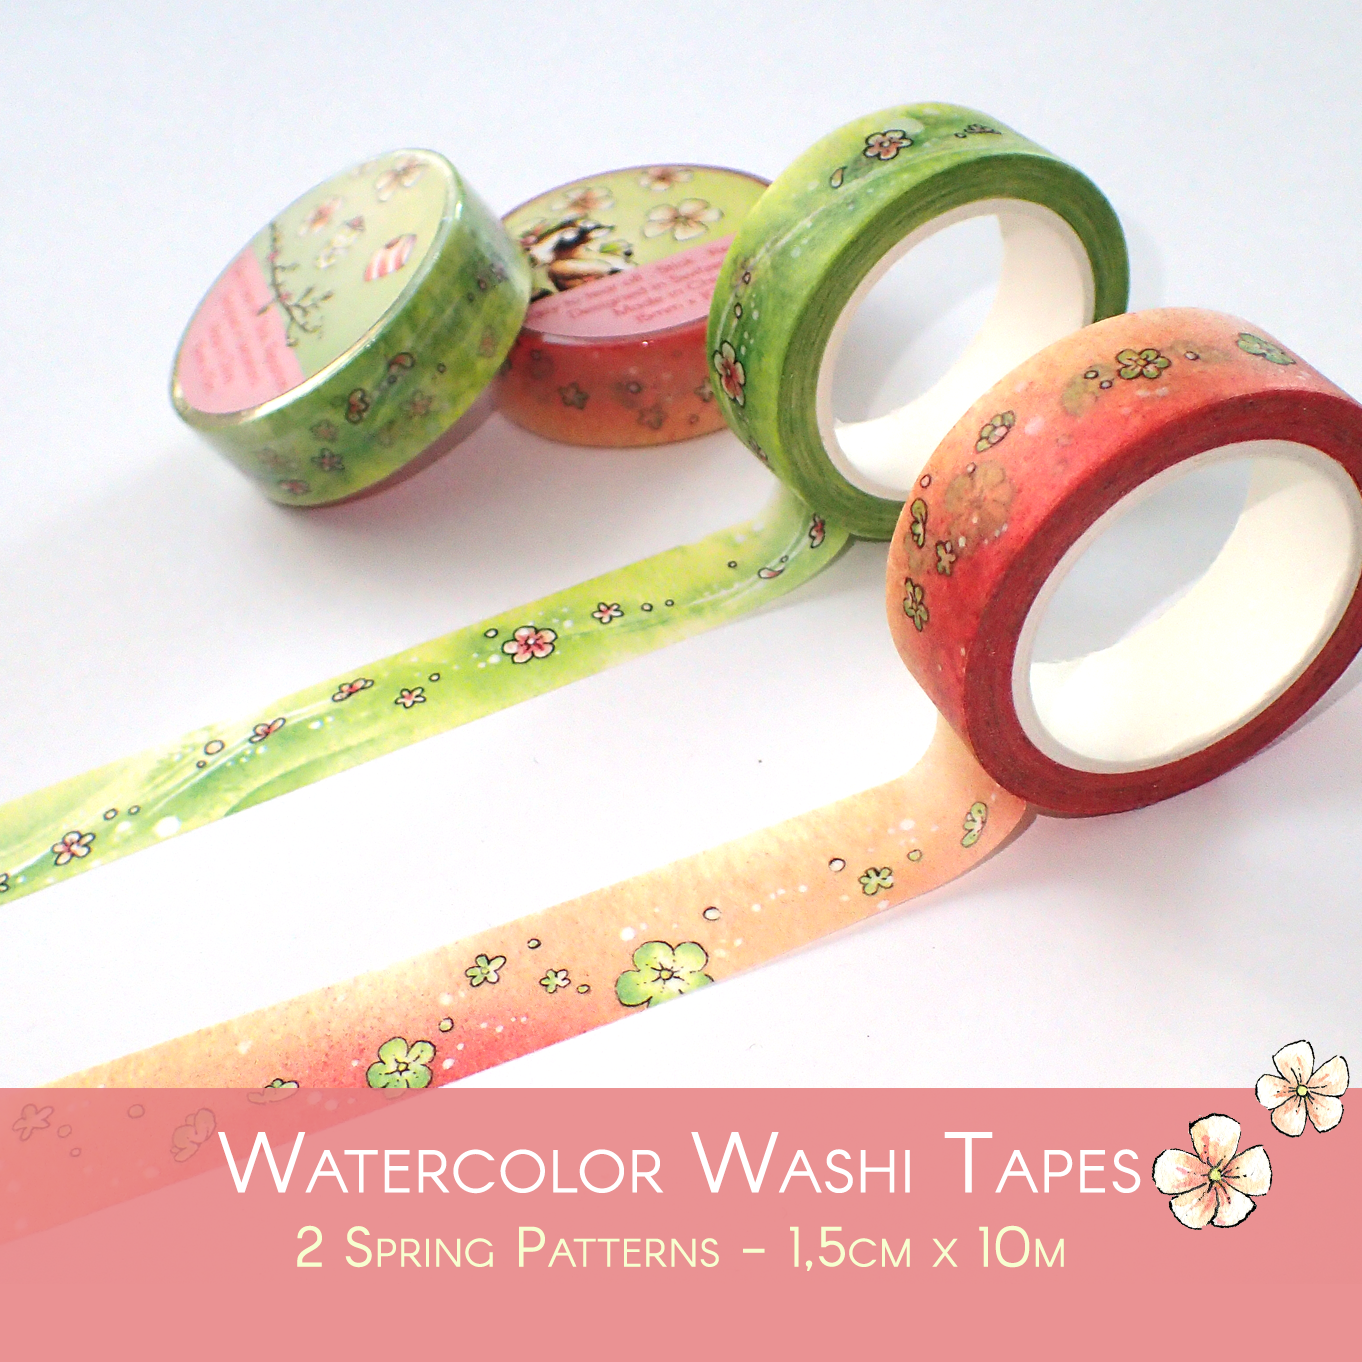 Flowered Washi Tapes in Spring Tones